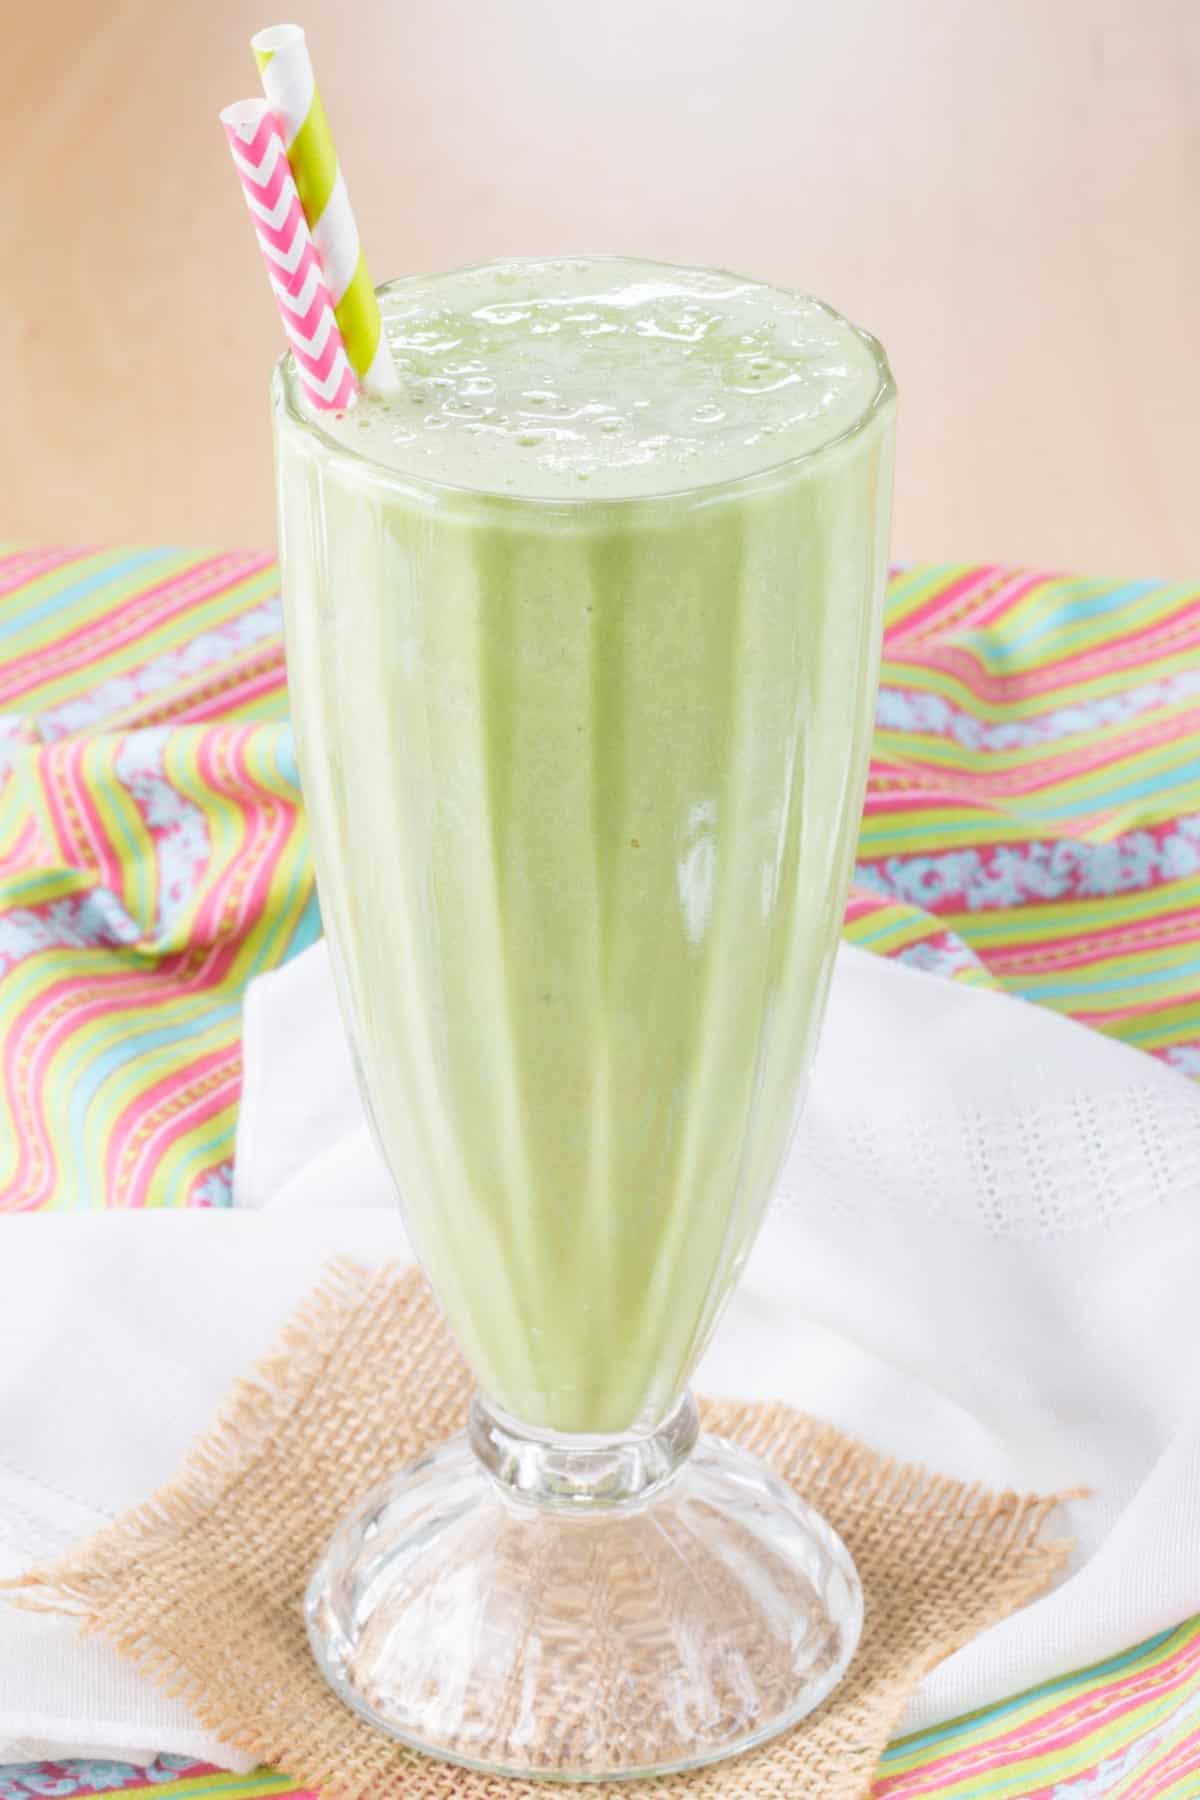 A green mint smoothie in a milkshake glass with two striped straws on top of cloth napkins and a small piece of burlap.